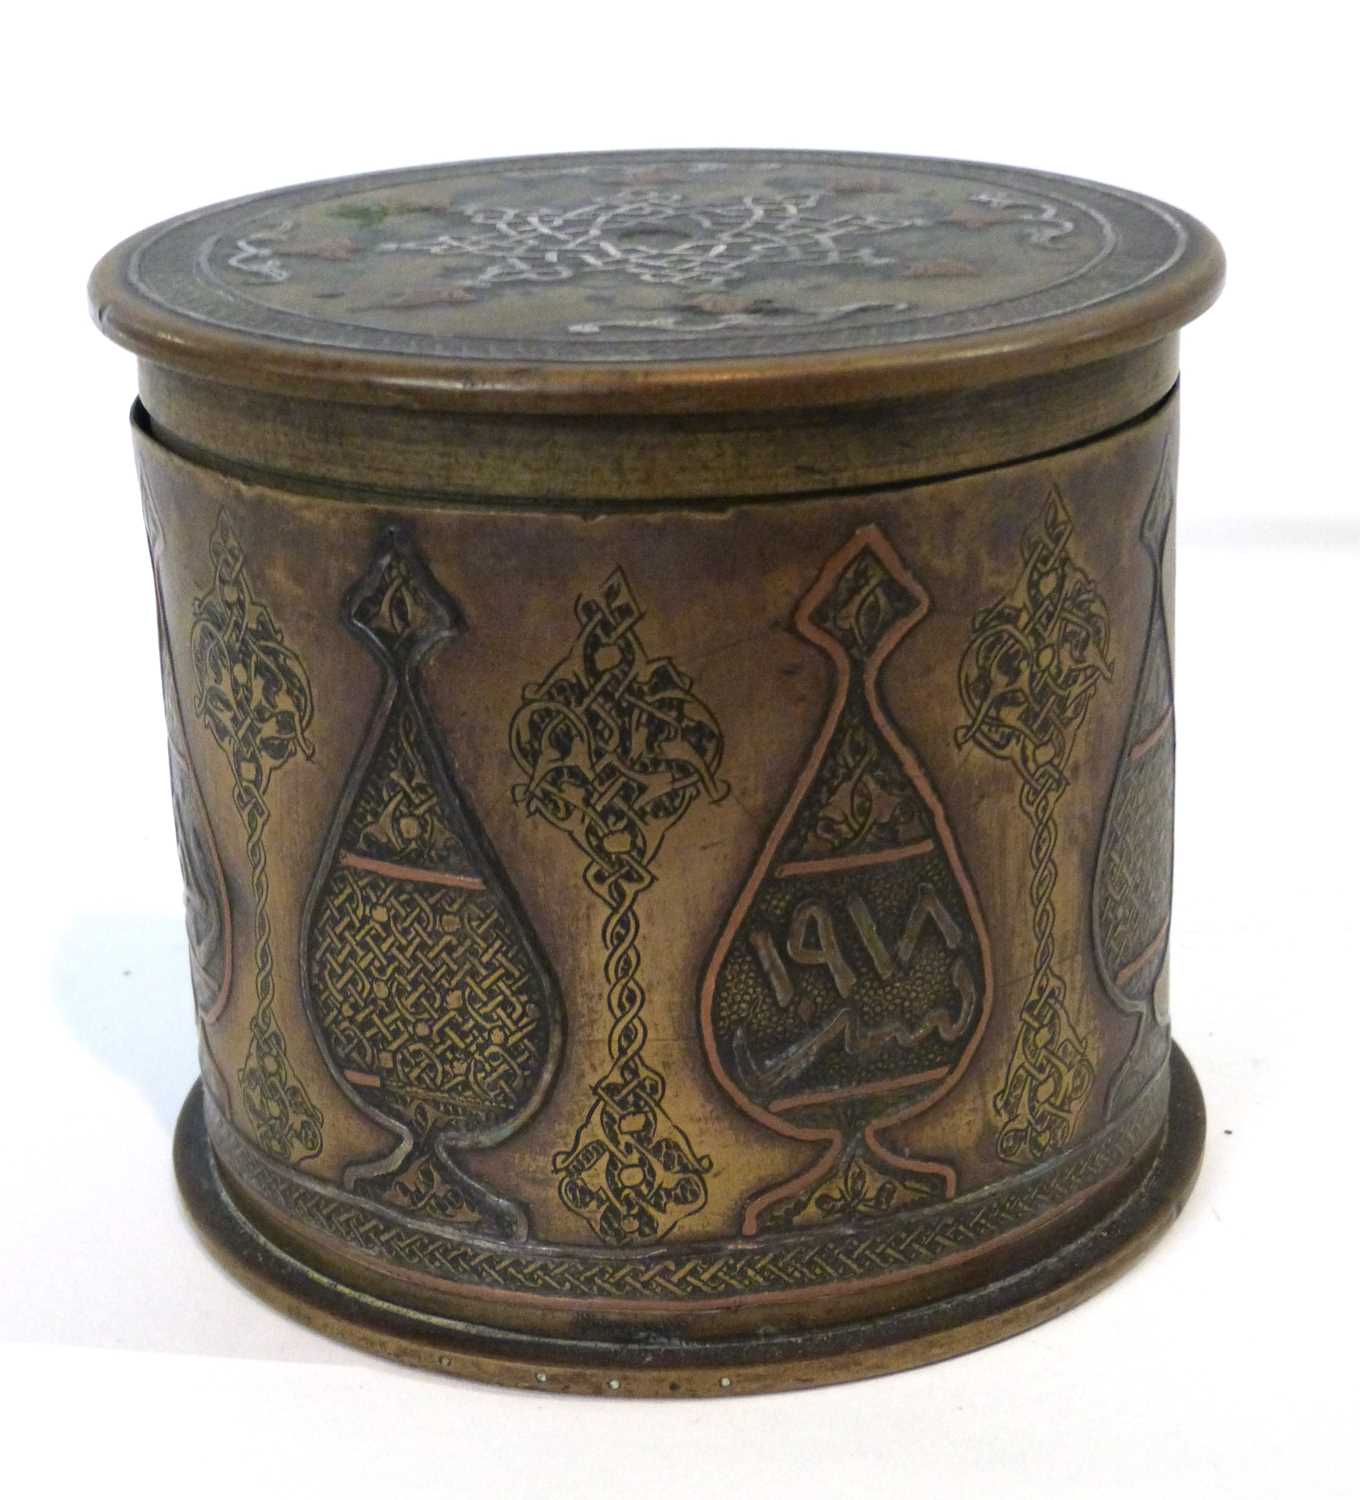 Trench Art - A German shell case and cover dated 1915 decorated with Islamic vases and script, - Image 4 of 6